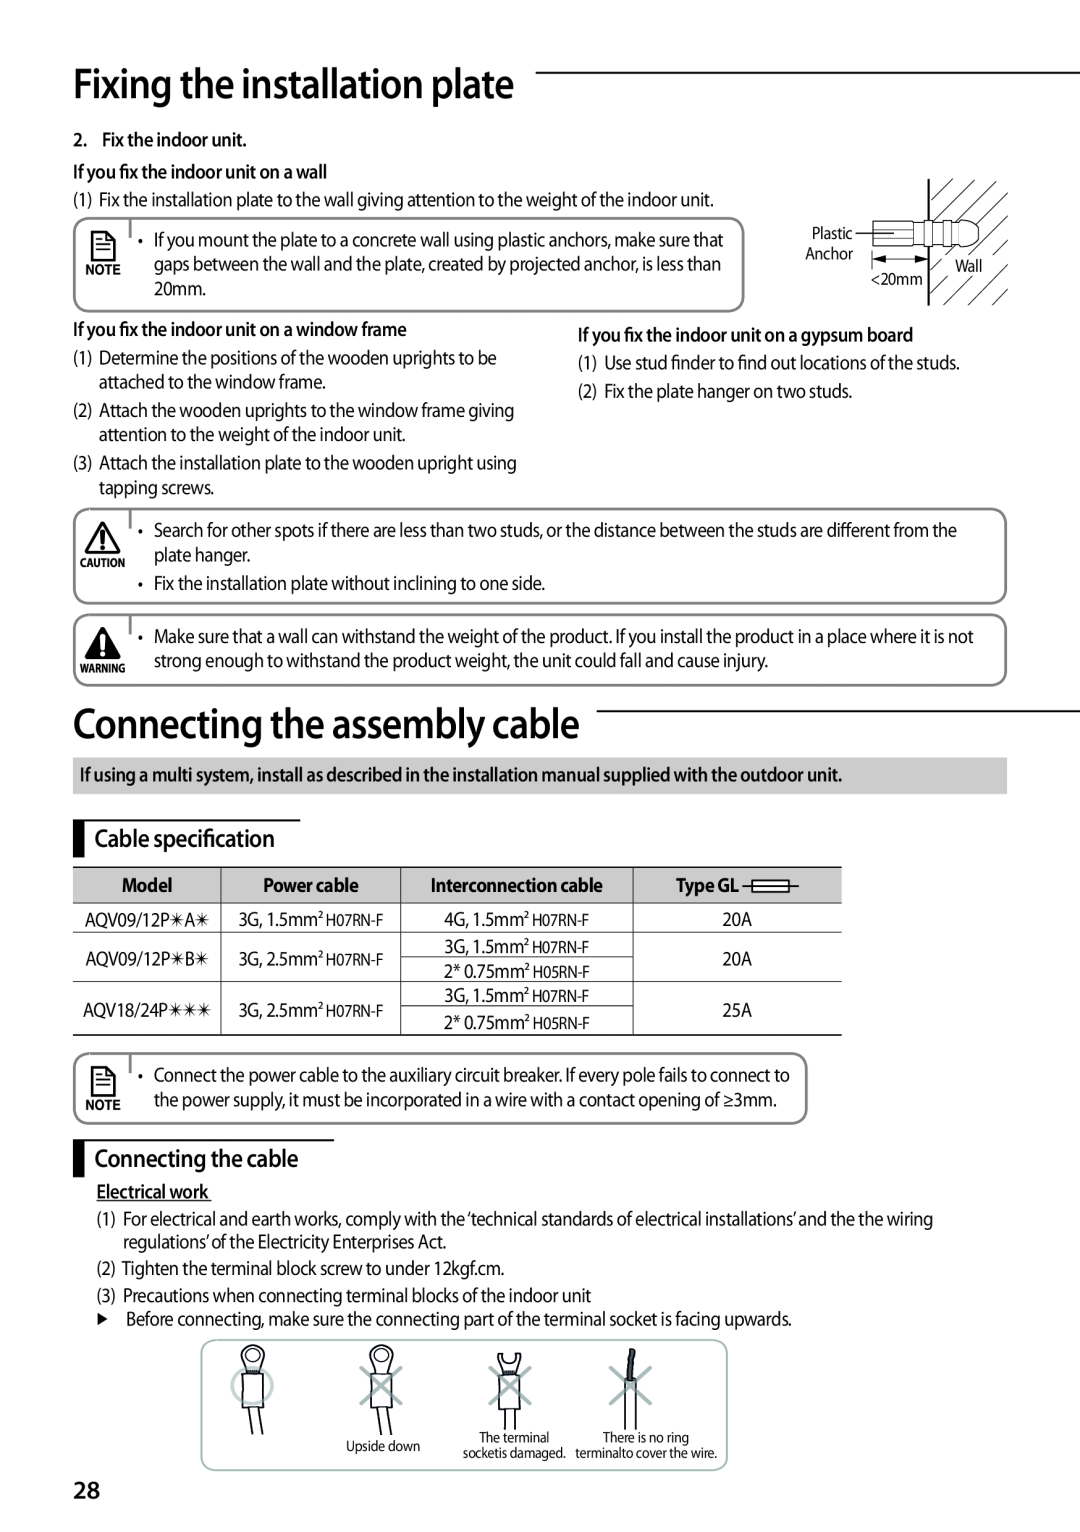 Samsung AQV24PSBXSER manual Connecting the assembly cable, Cable specification, Connecting the cable, Power cable, Model 